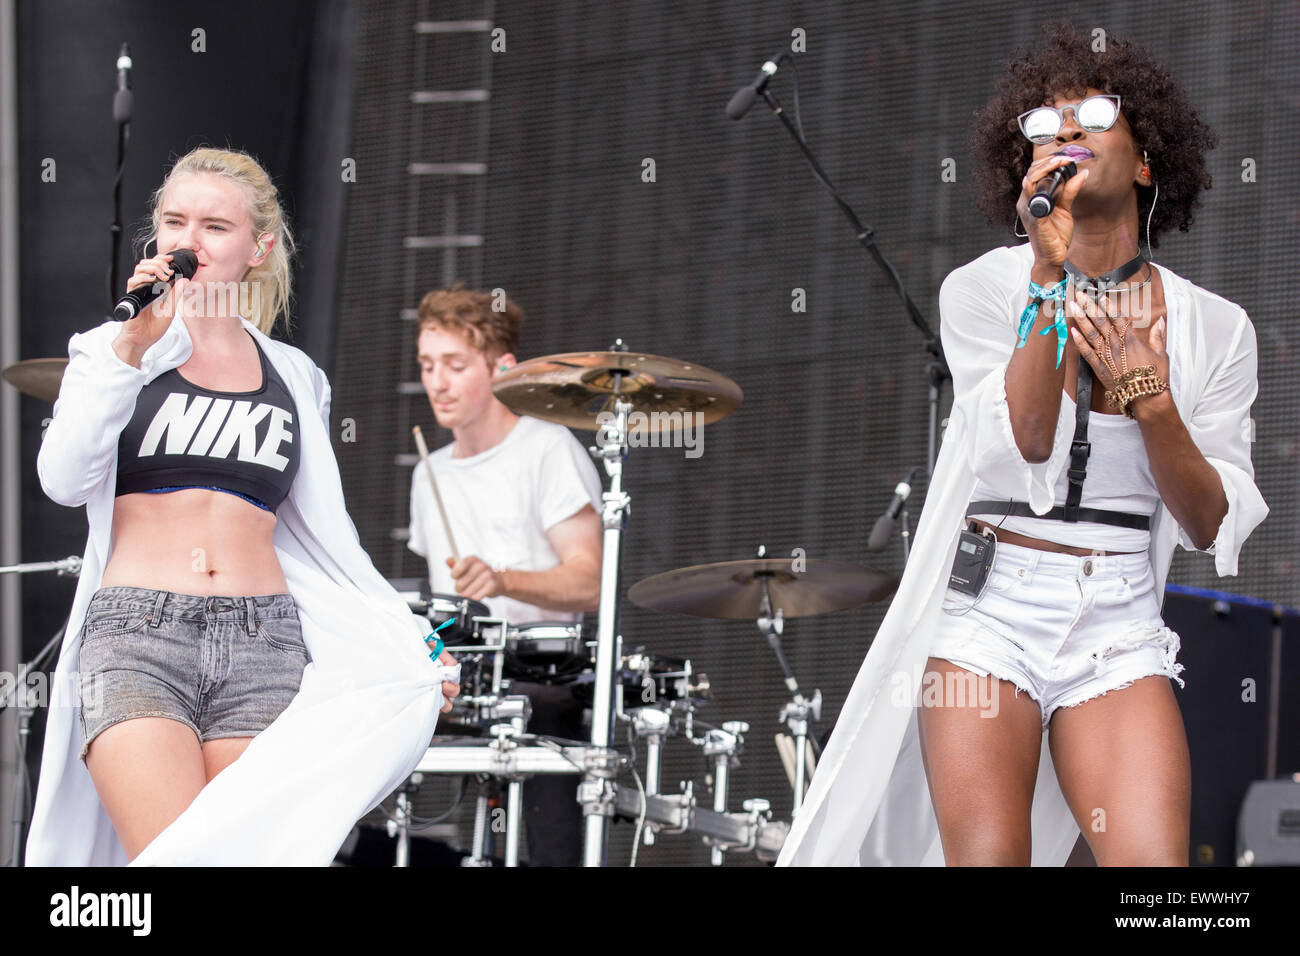 Dover, Deleware, USA. 19th June, 2015. GRACE CHATTO (L), LUKE PATTERSON, and ELISABETH TROY (R) of Clean Bandit performs live on stage at the Firefly Music Festival in Dover, Delaware © Daniel DeSlover/ZUMA Wire/Alamy Live News Stock Photo